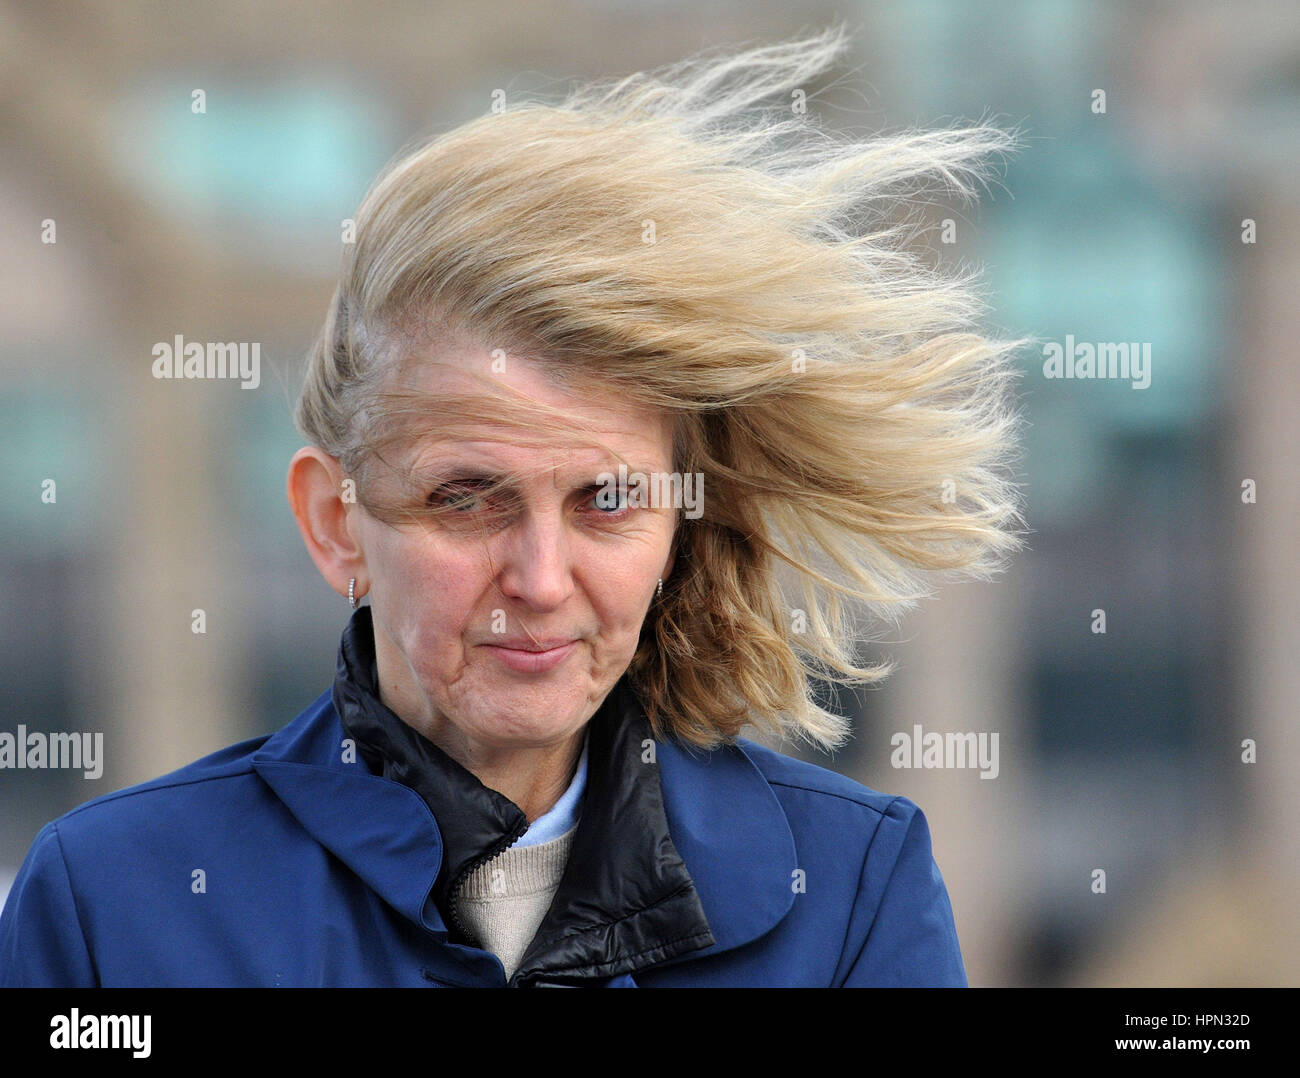 The hair of a woman is caught in a gust of wind as she walks across Millennium Bridge in central London, as flights have been cancelled and commuters were warned they faced delays after Storm Doris reached nearly 90mph on its way to batter Britain. Stock Photo